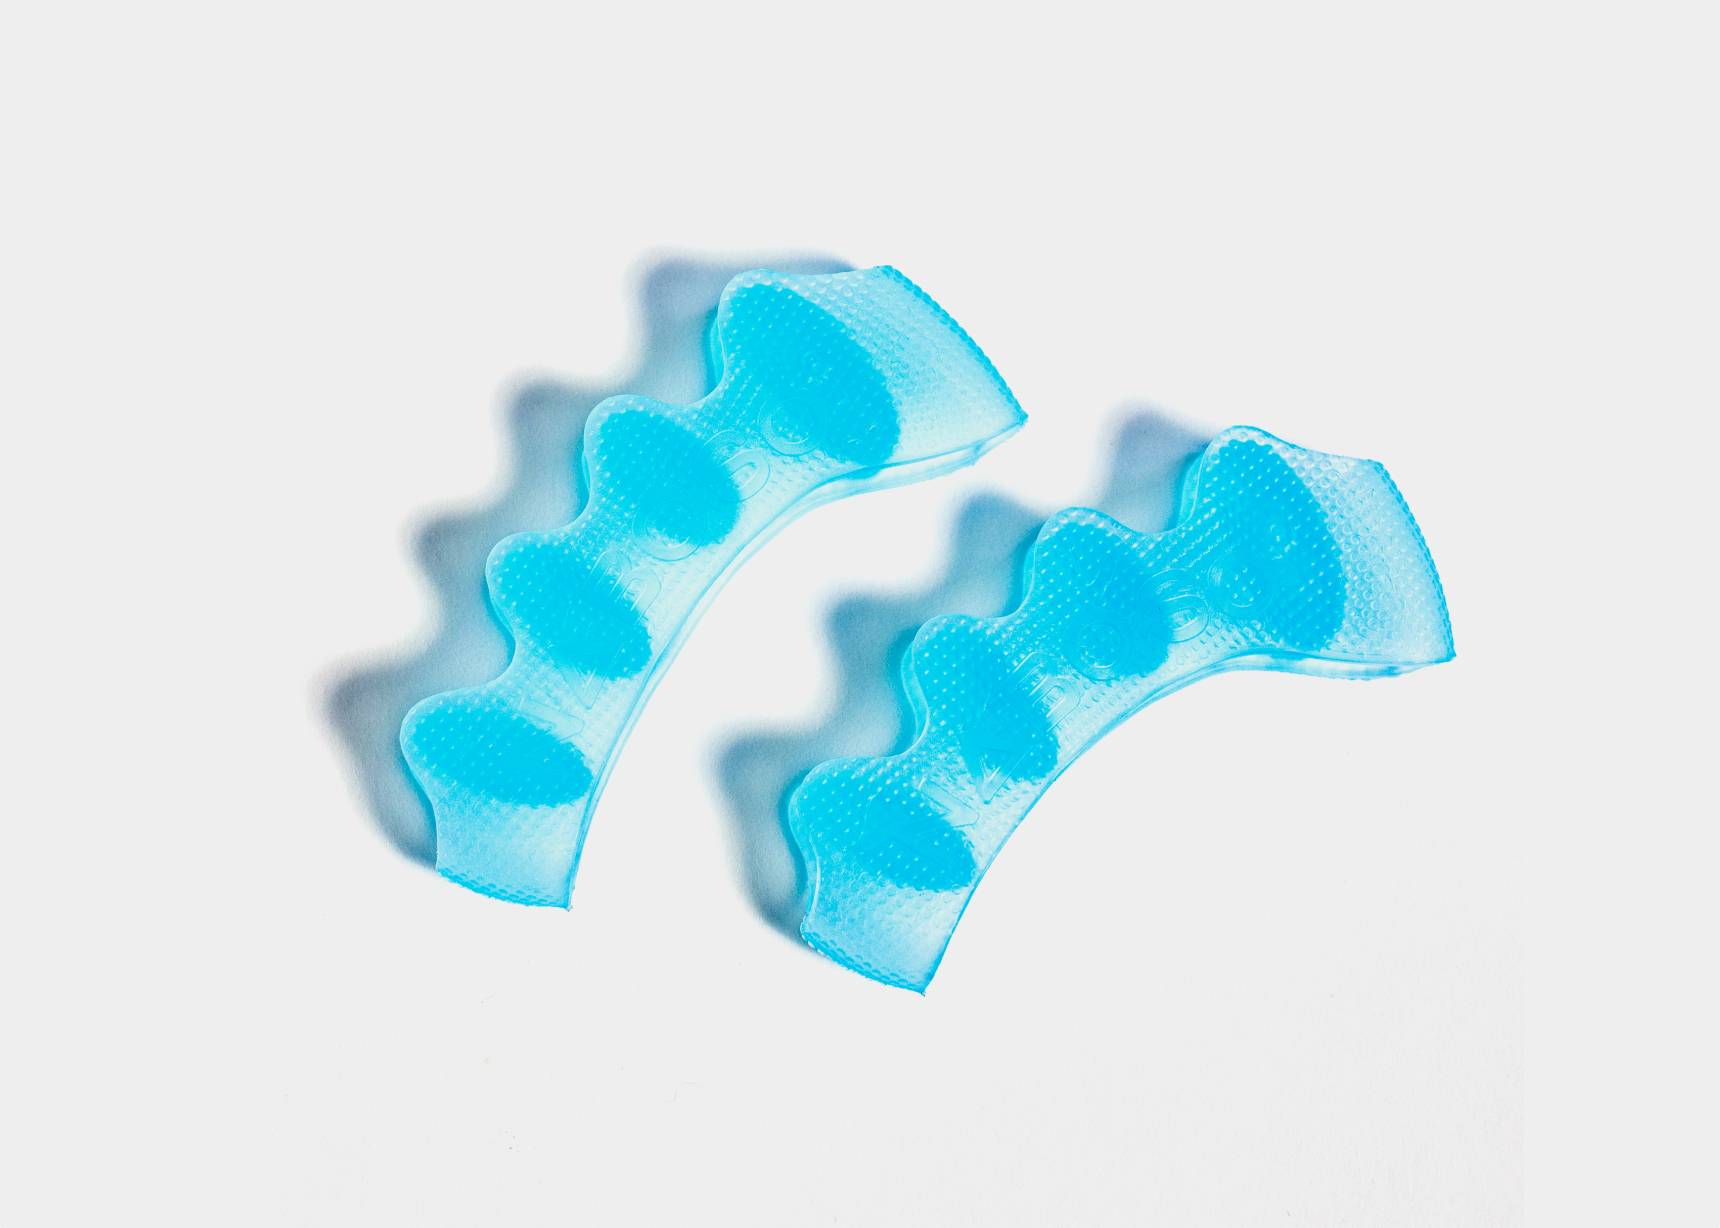 Two Naboso Splay toe separators in blue color.